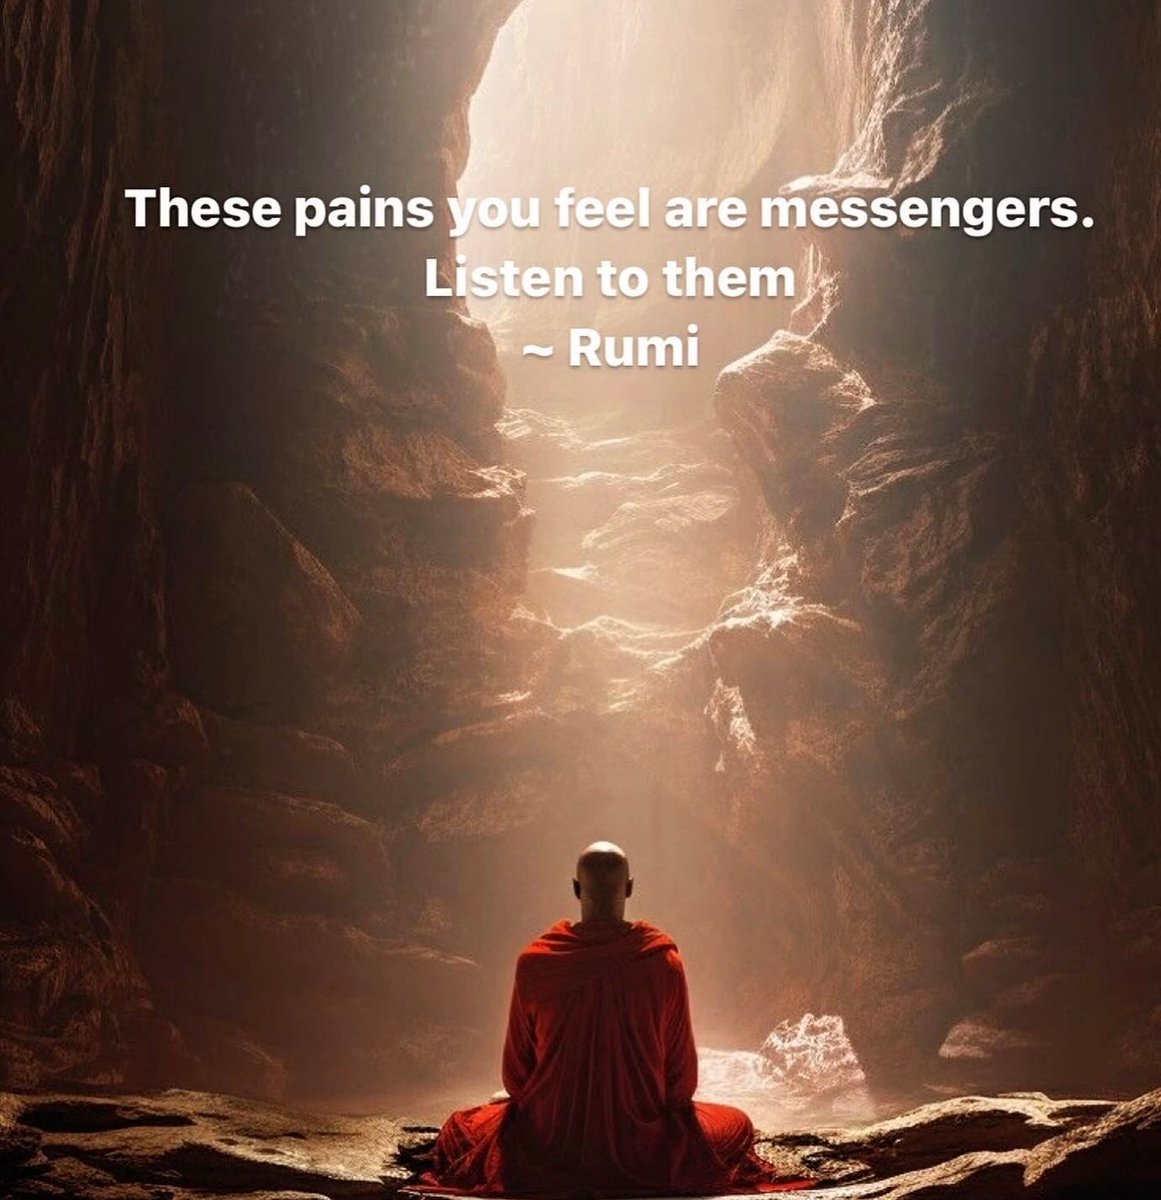 These pains you feel are messengers. Listen to them. Rumi